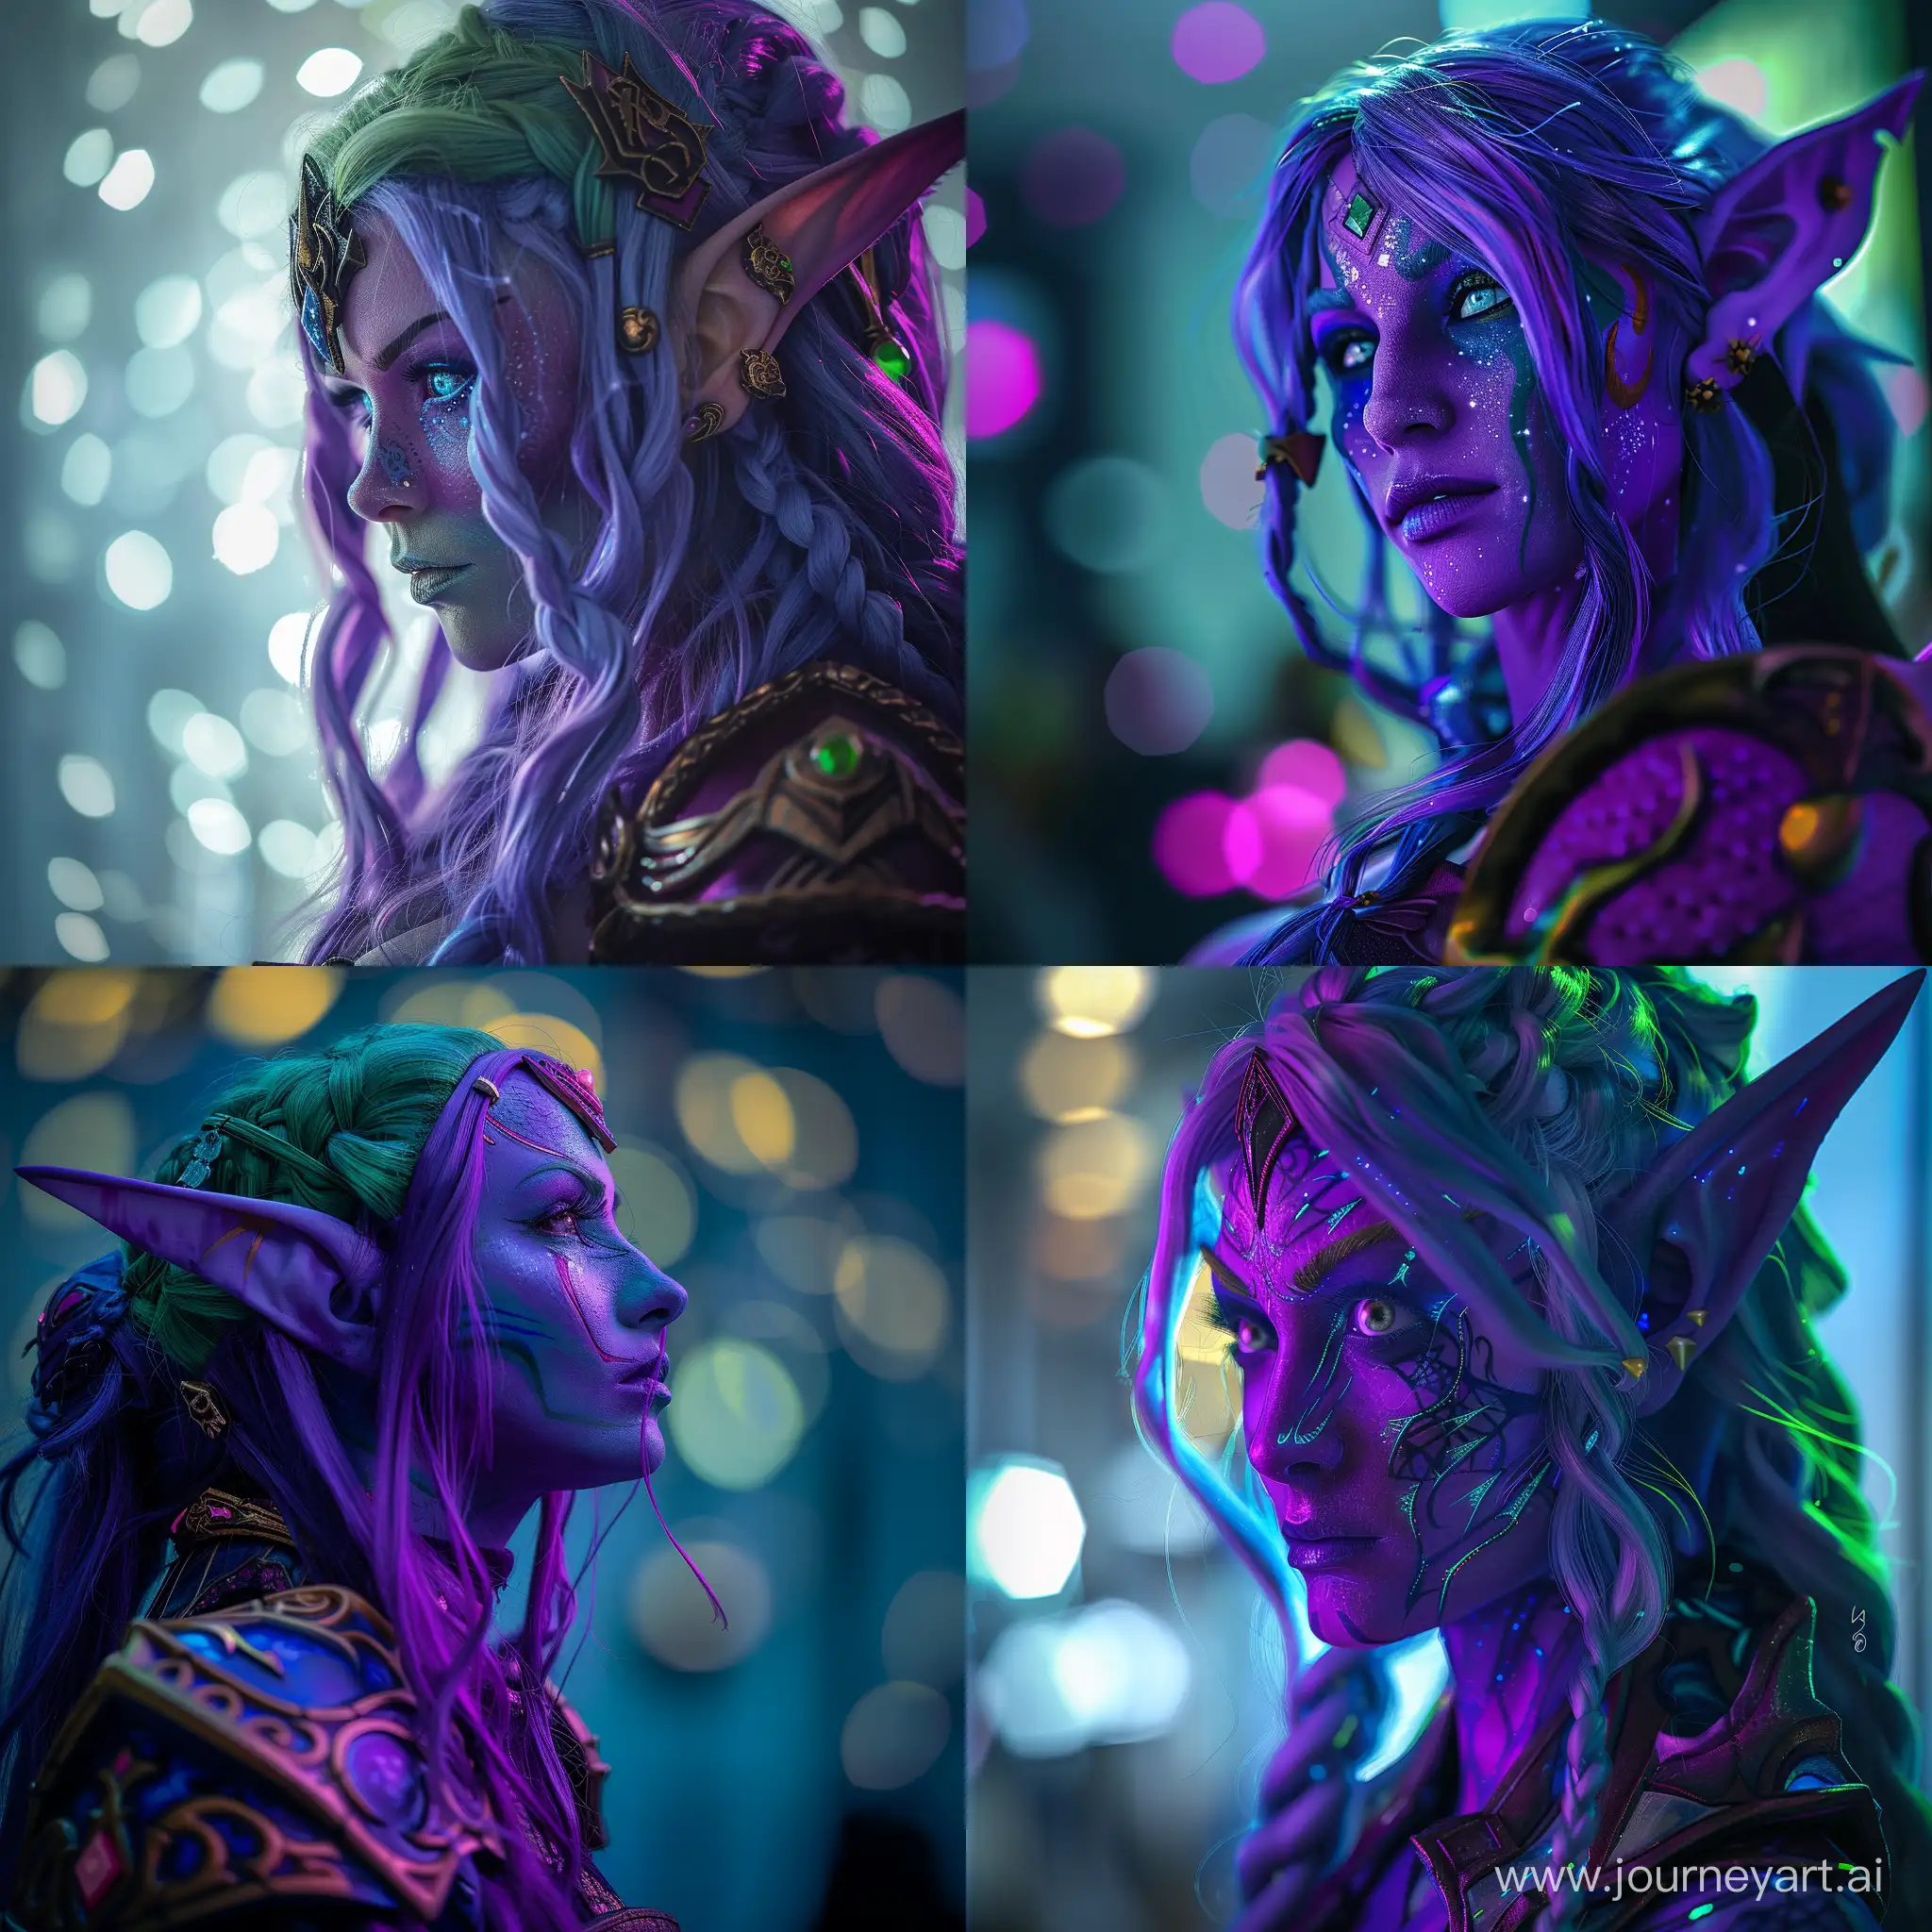 world of warcraft Tyrande Whisperwind character, purple skin, blue-green hair, hyber detailed, modelcore, portrait photo. use sony a7 II camera with an 30mm lens fat F.1.2 aperture setting to blur the background and isolate the subject. use distinctive lighting on the subjects shot. The image should be shot in ultra-high resolution. --v 6